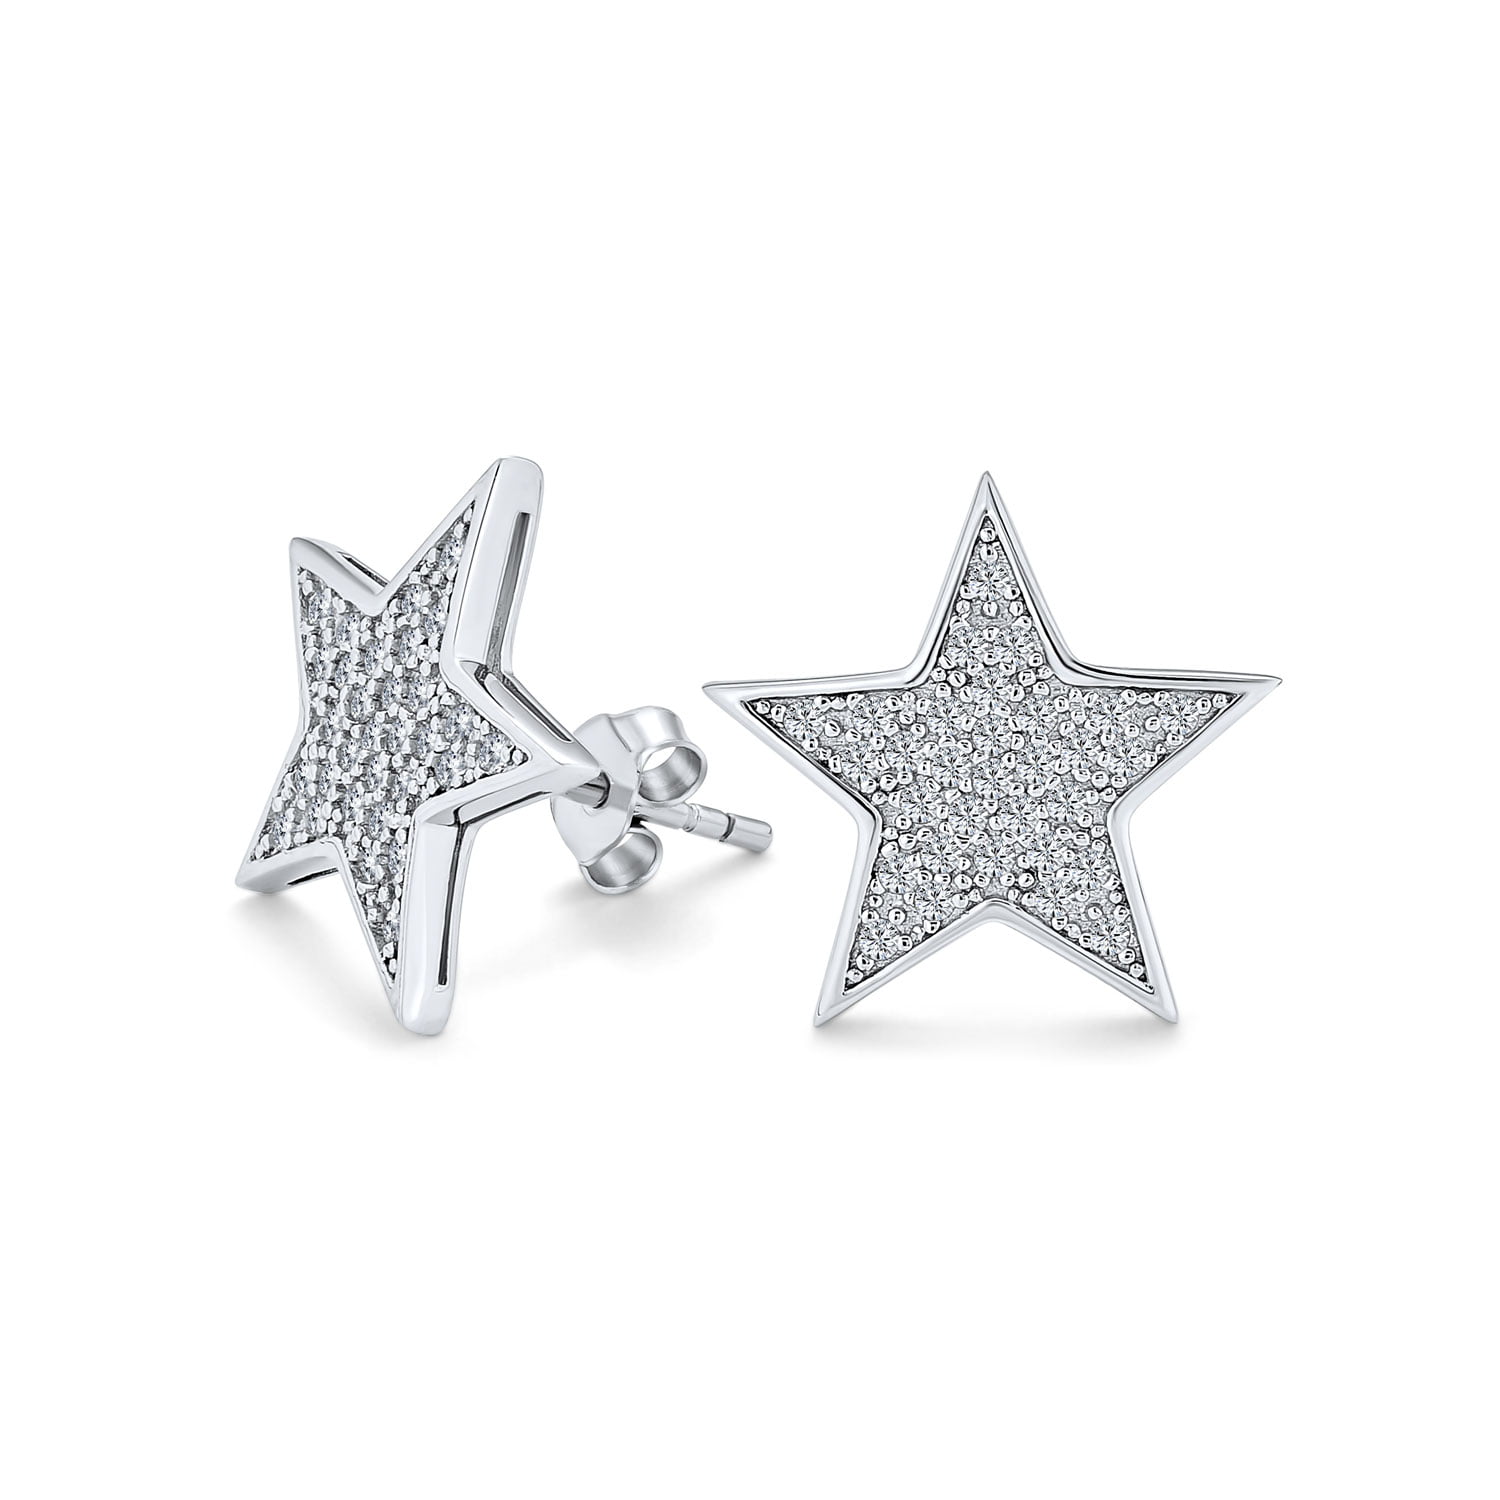 STERLING SILVER EARRINGS WITH CRYSTAL CZ STAR STUDS